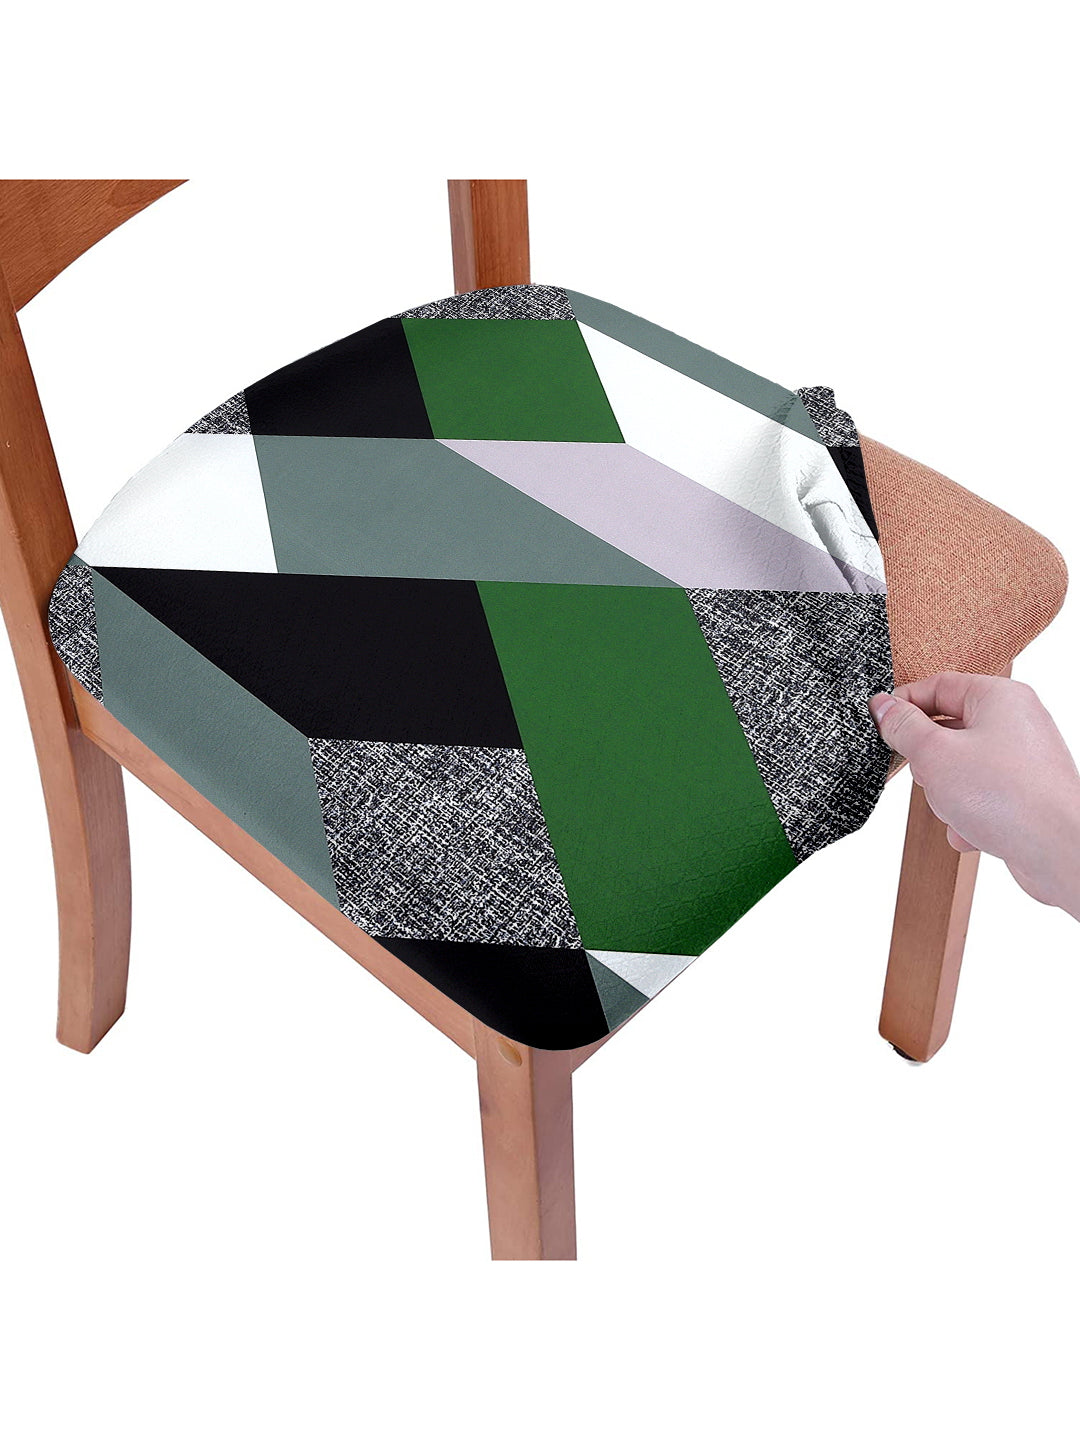 Stretchable Geometric Printed Non Slip Chair Pad Cover Pack of 6- Green